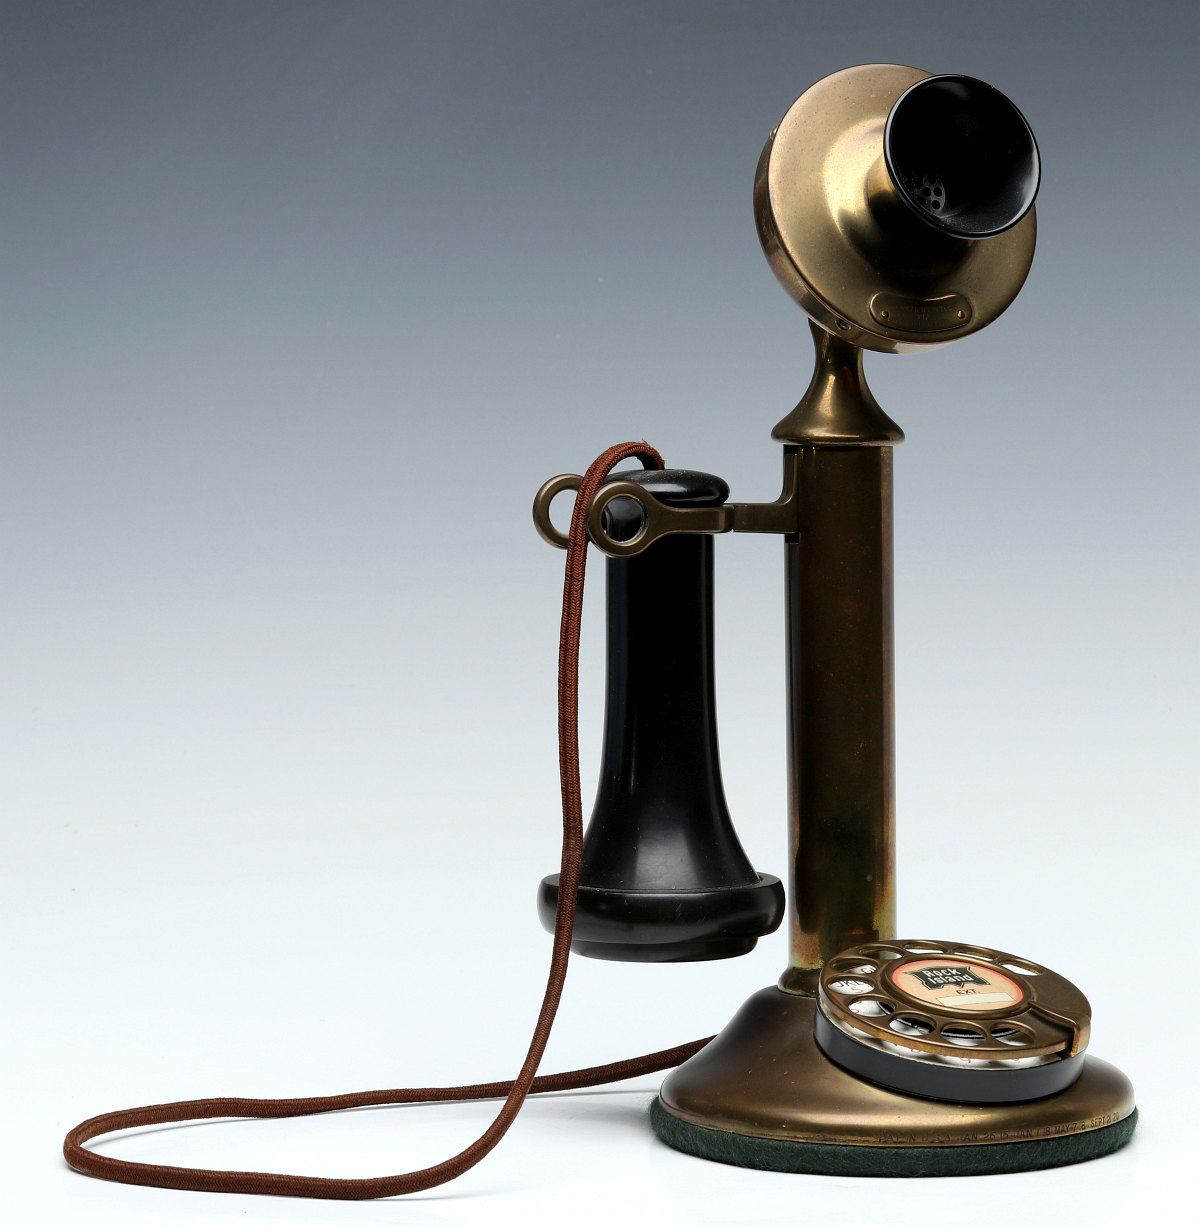 A CANDLESTICK TELEPHONE WITH ROCK ISLAND LINES BADGE